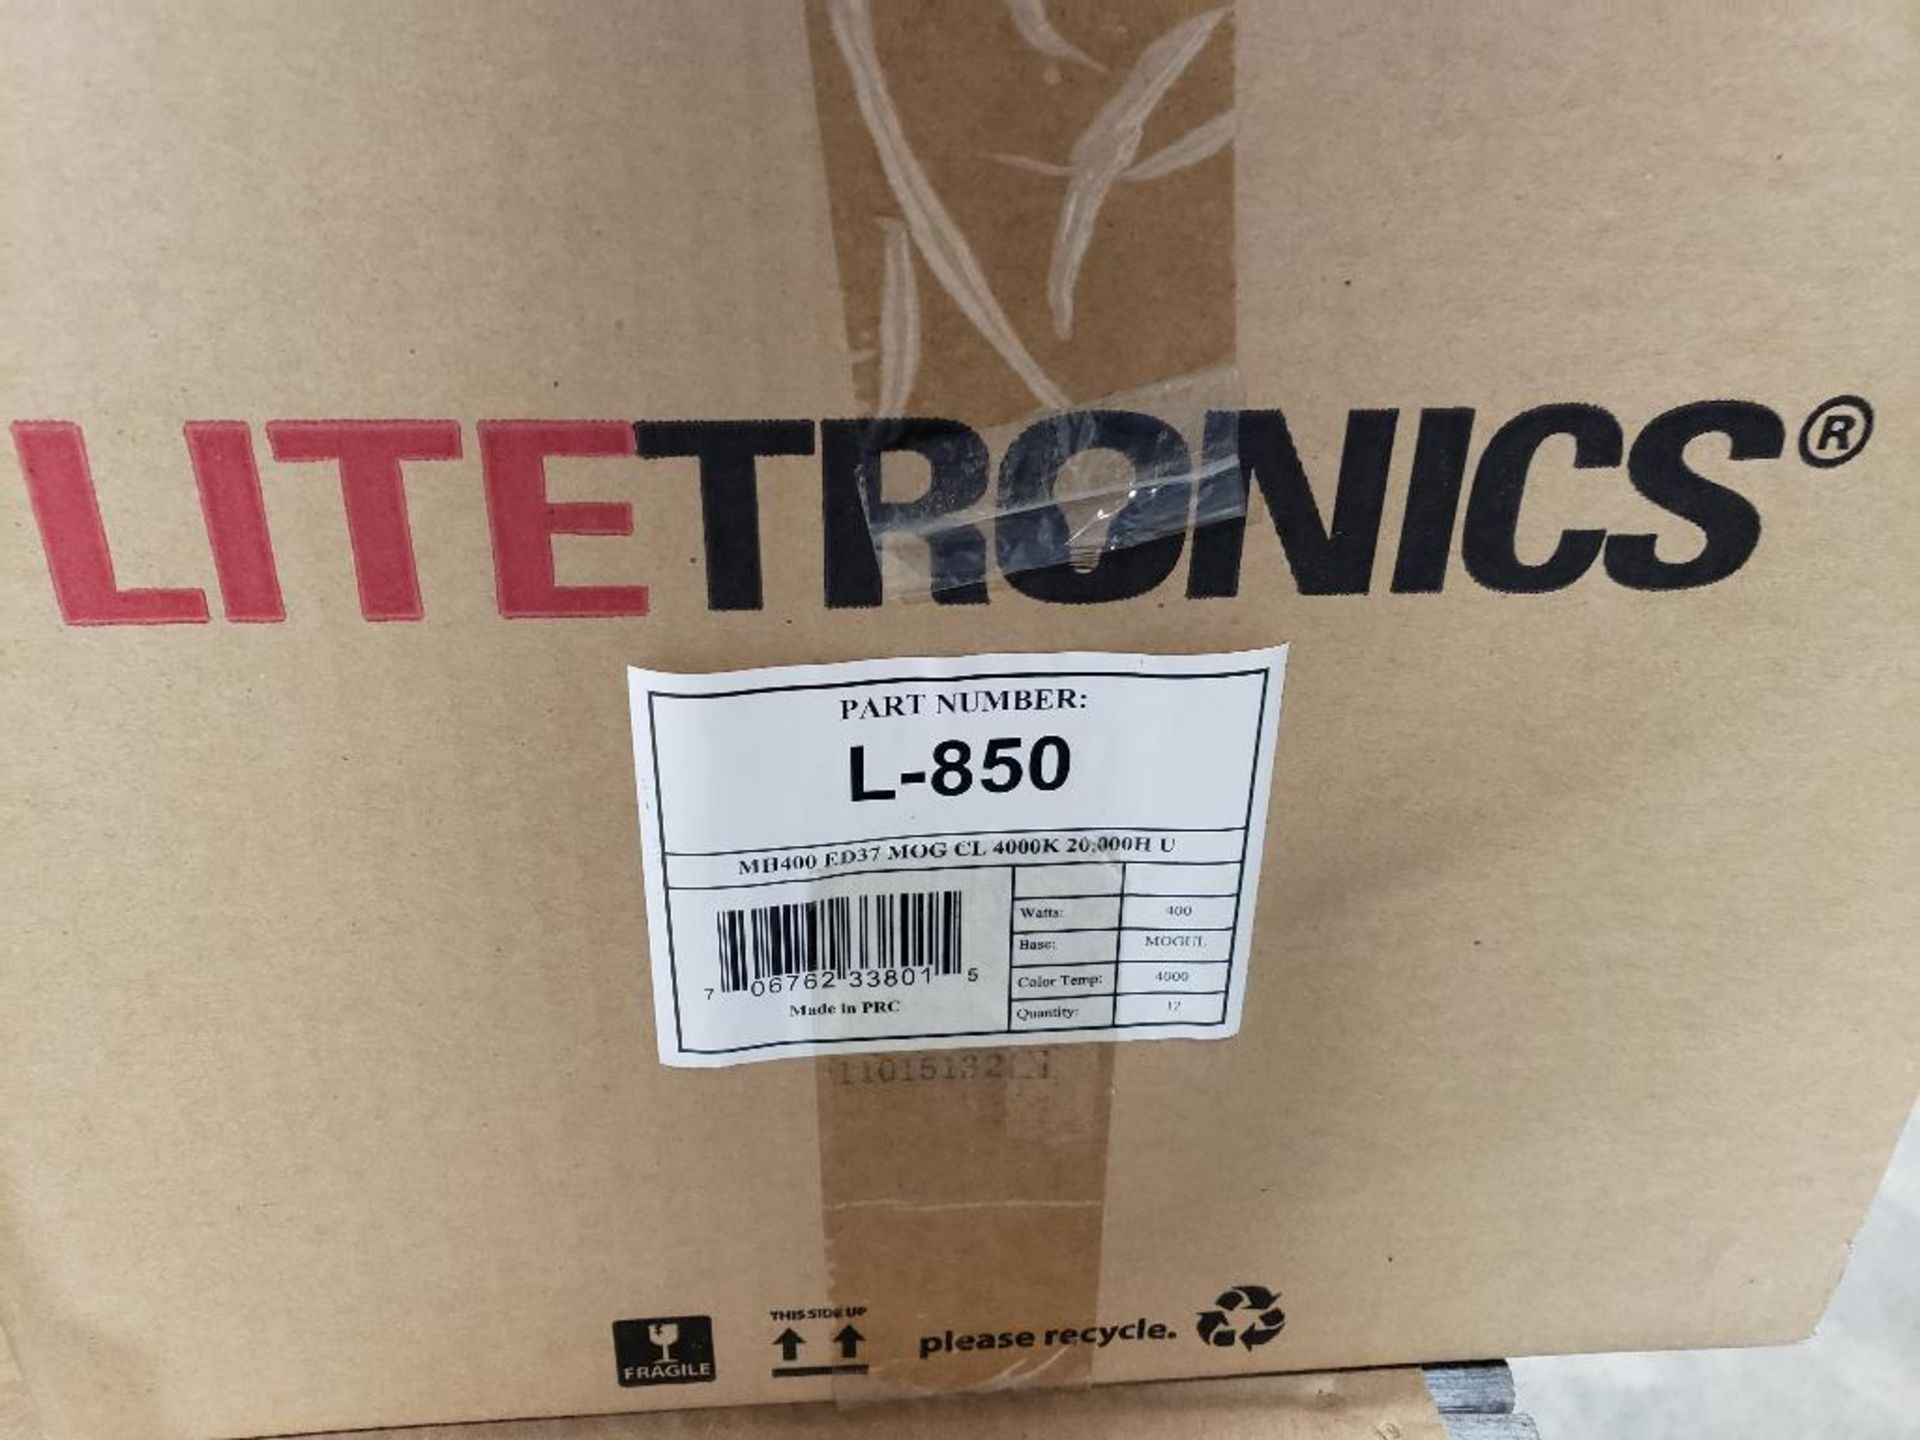 Qty 12 - Litetronics light. Part number L-850. New in box. - Image 2 of 3